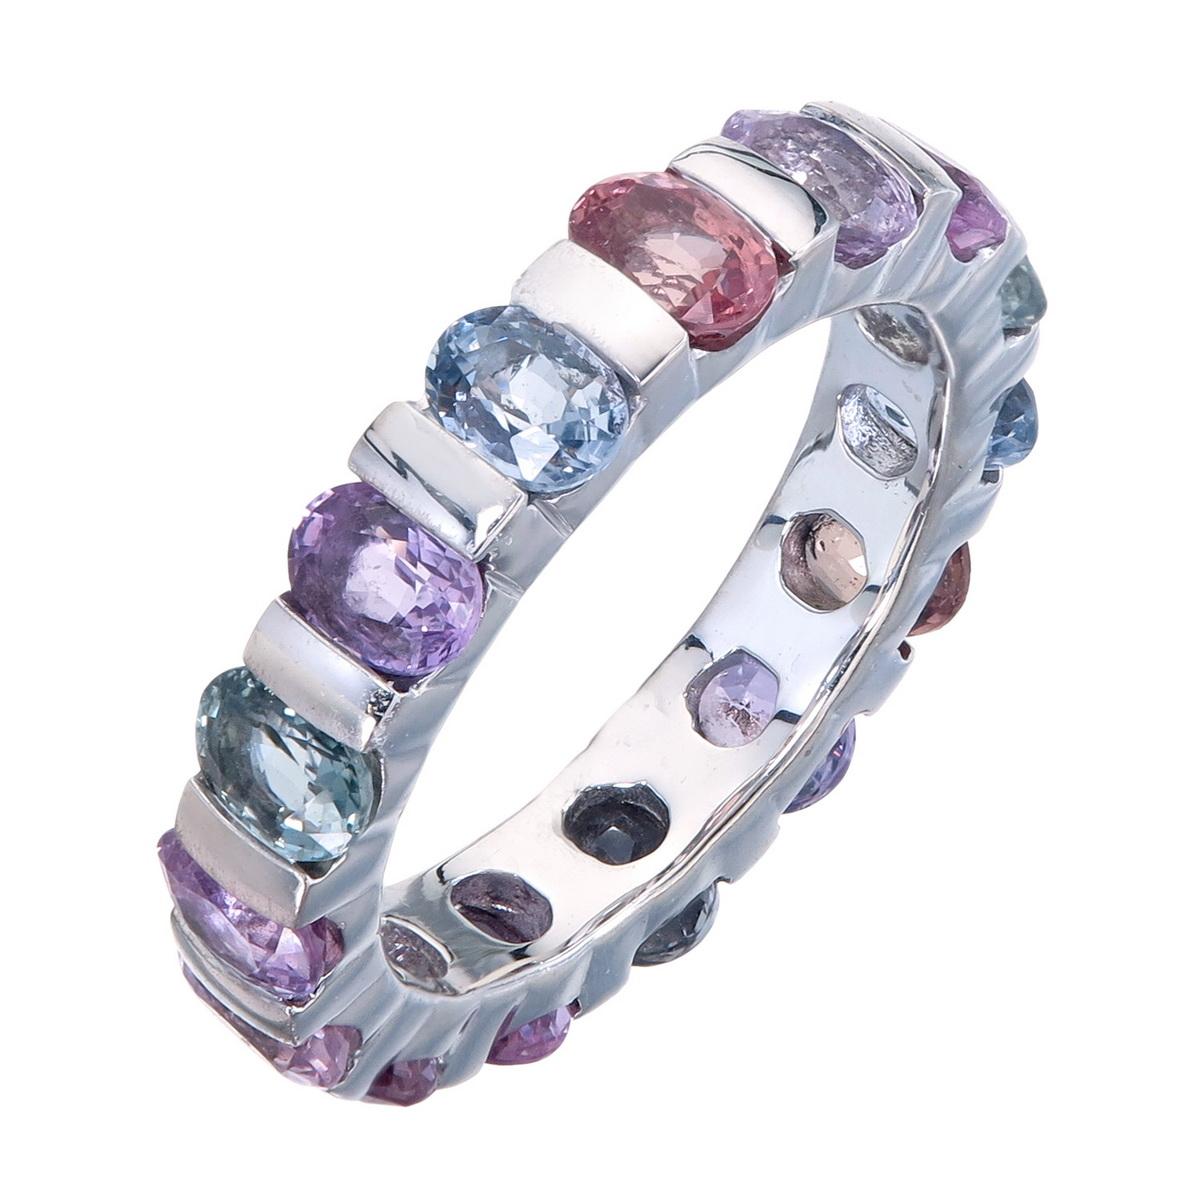 Orloff of Denmark; Fifteen Fancy Sapphire Eternity Band set in 925 Sterling Silver.

Ranging from blues to pinks and even light greens, these fancy sapphires come together to form a gorgeous band of eternal color and sparkle.
Elegantly flush-set in